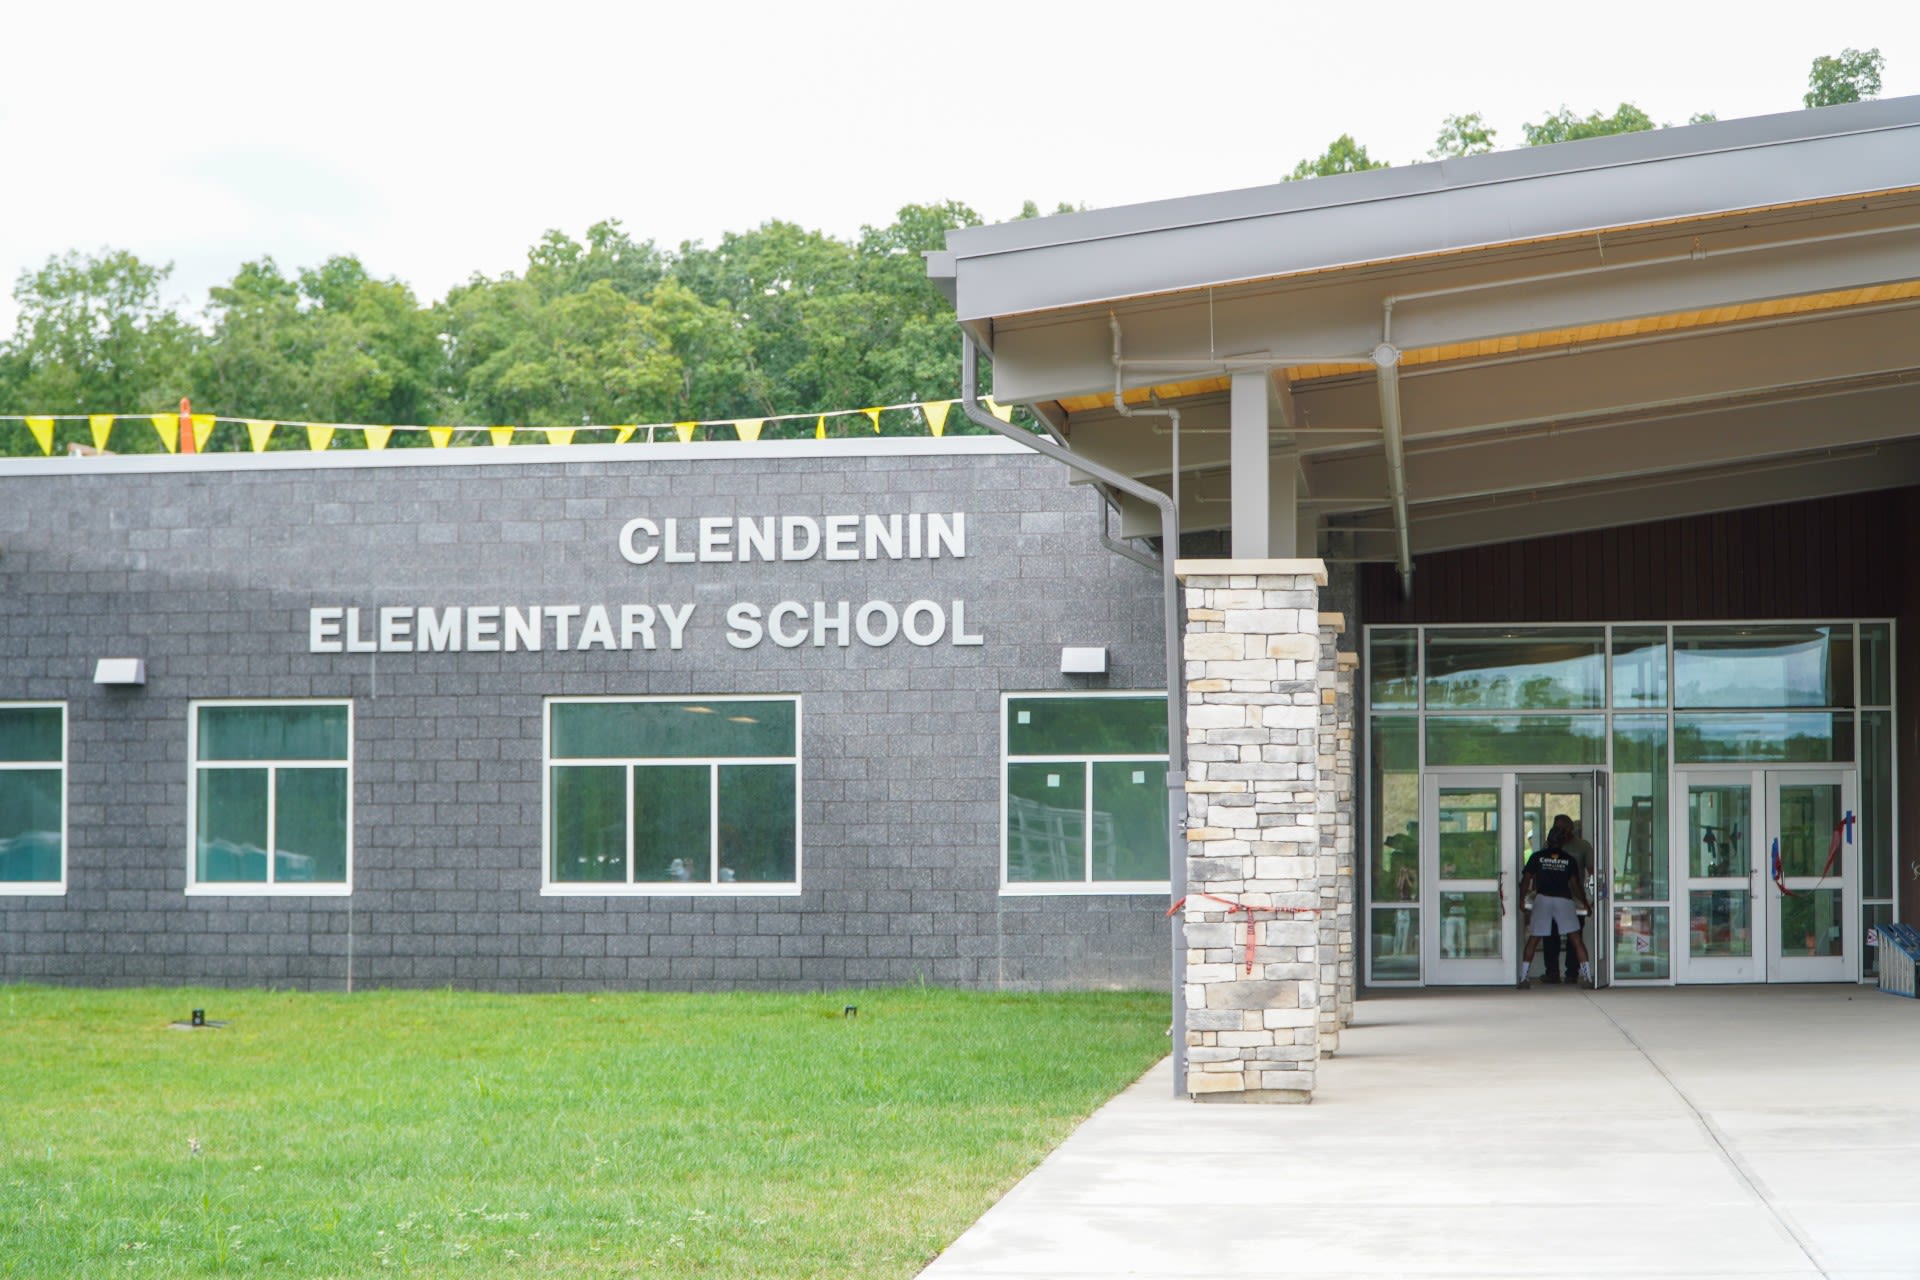 Clendenin Elementary School to bring modern classrooms and industry standard resources to its students - WV MetroNews